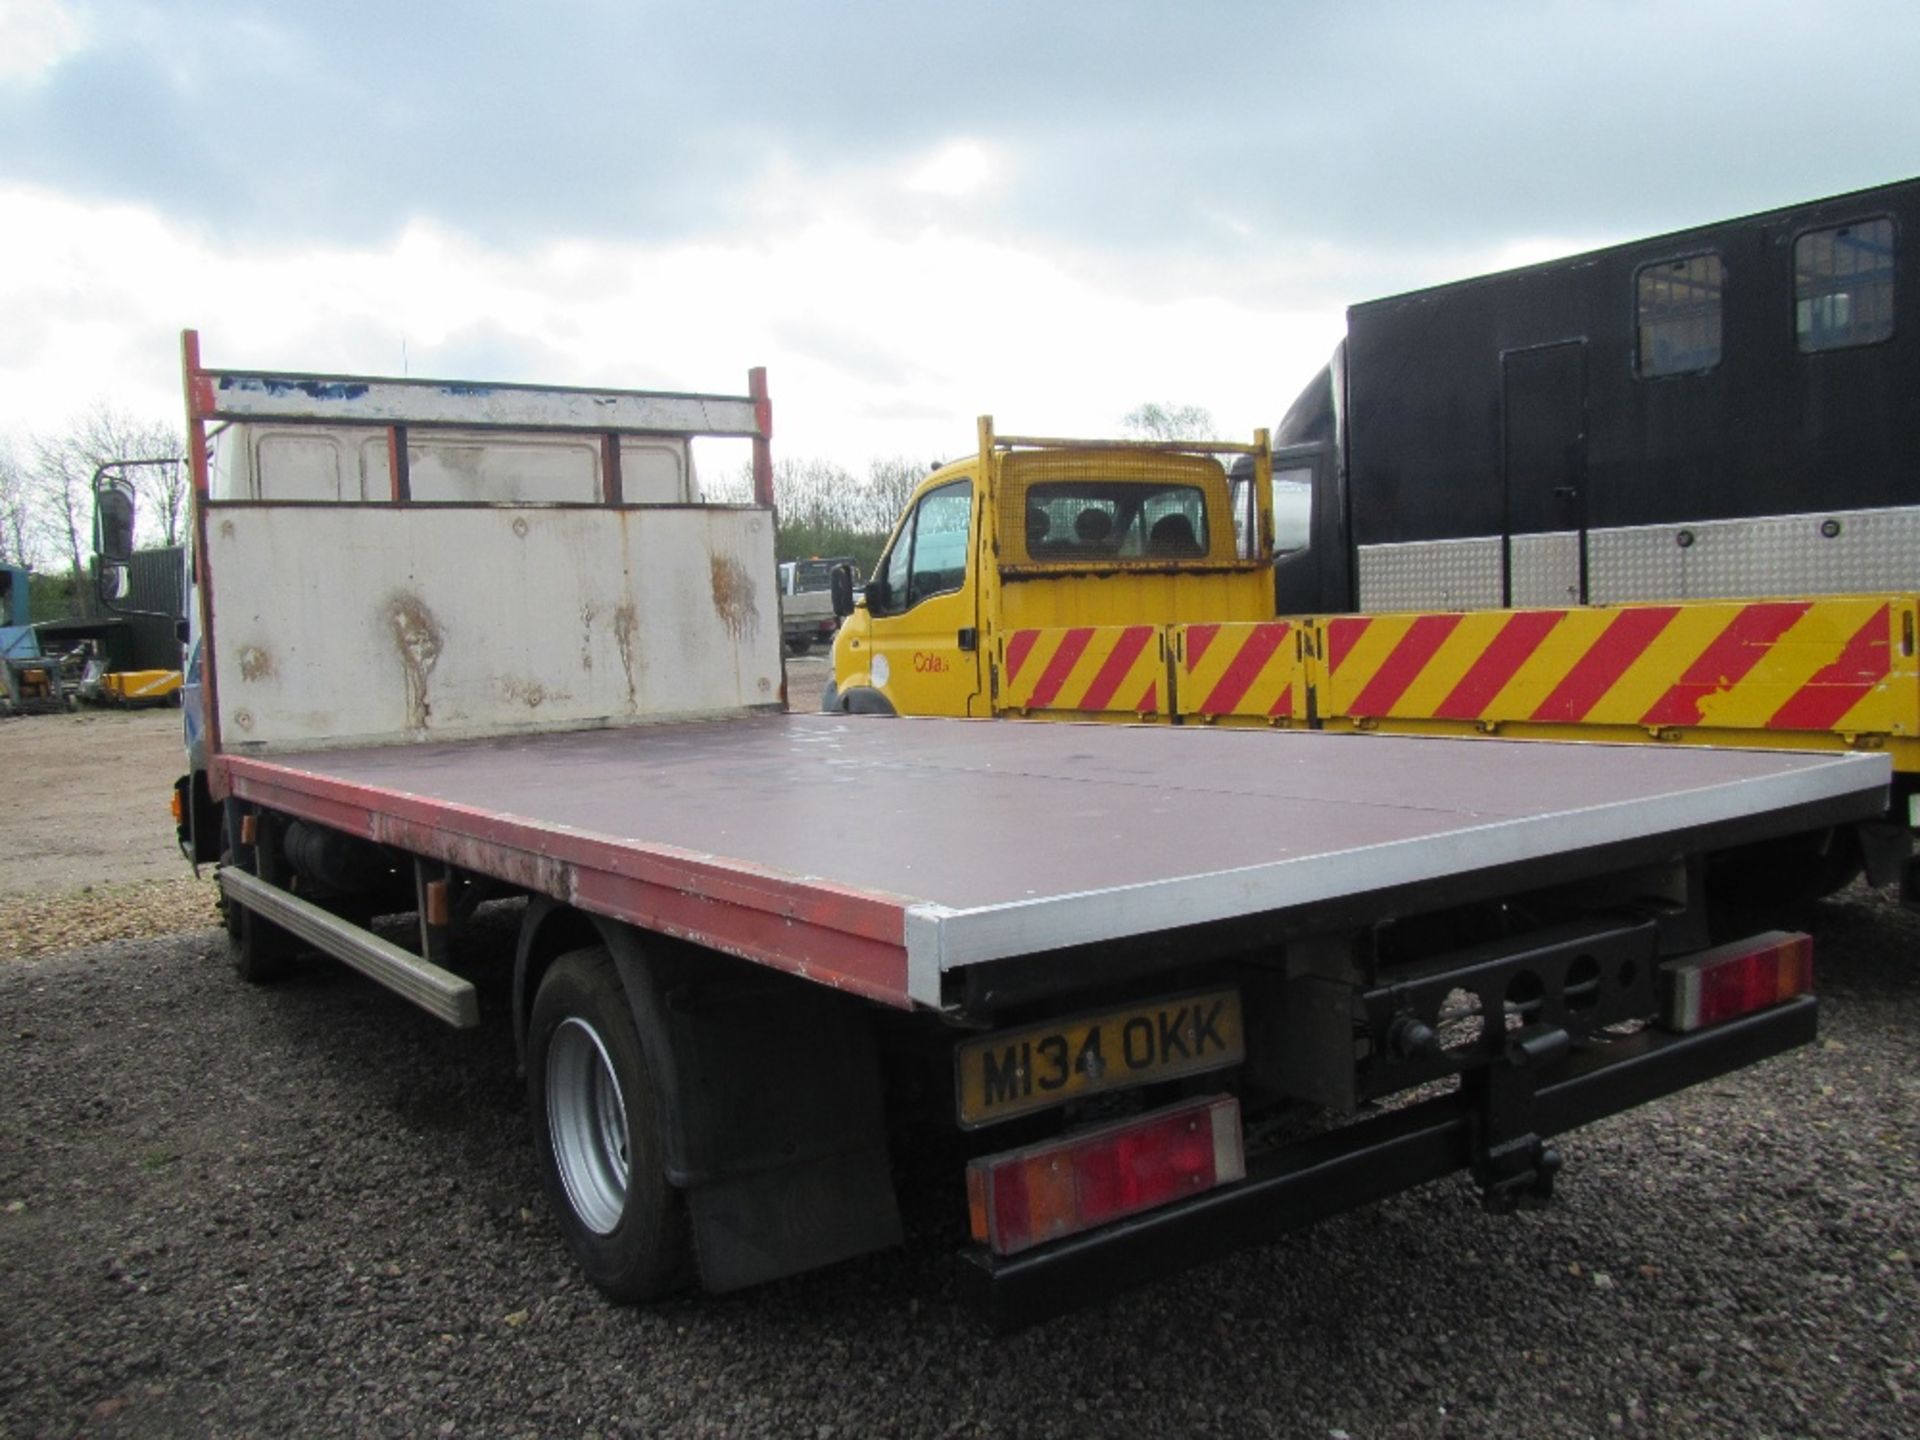 1994 Man 7.5 Ton Flat bed c/w New Floor Fitted. Reg Docs will be supplied. Reg. No. M134 OKK - Image 6 of 7